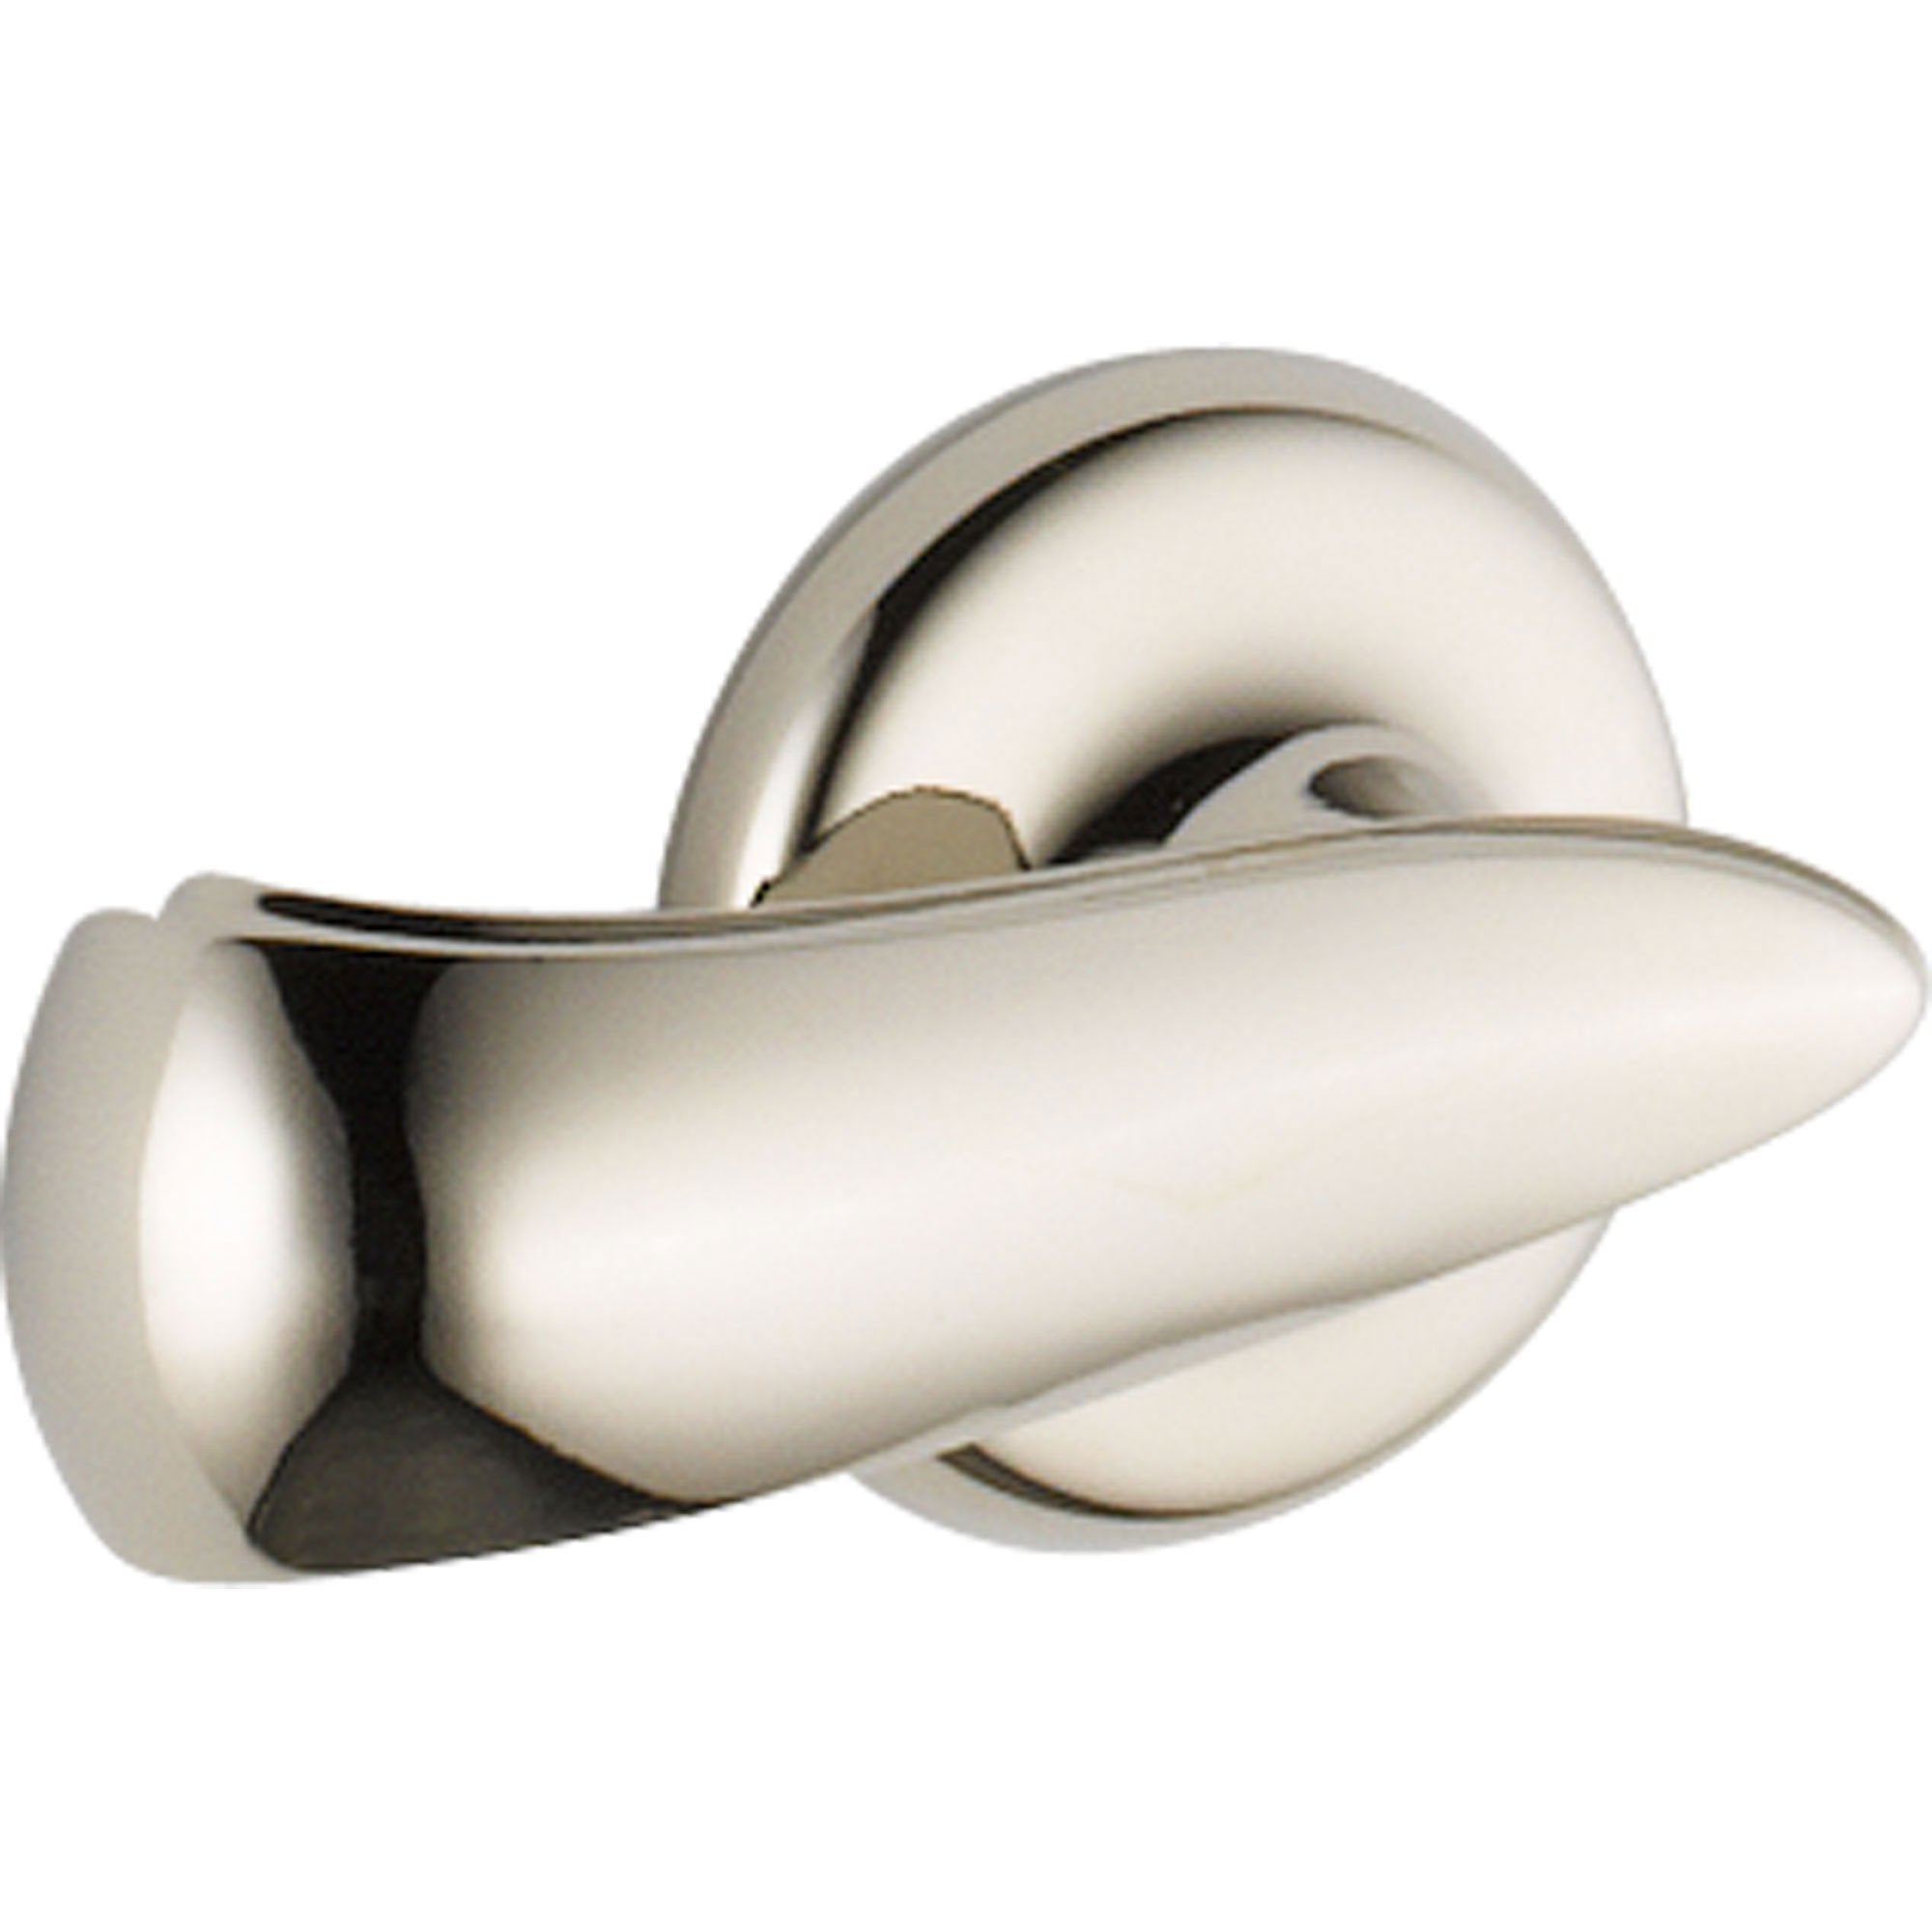 Delta Cassidy Polished Nickel French Curve Toilet Tank Flush Handle 579581